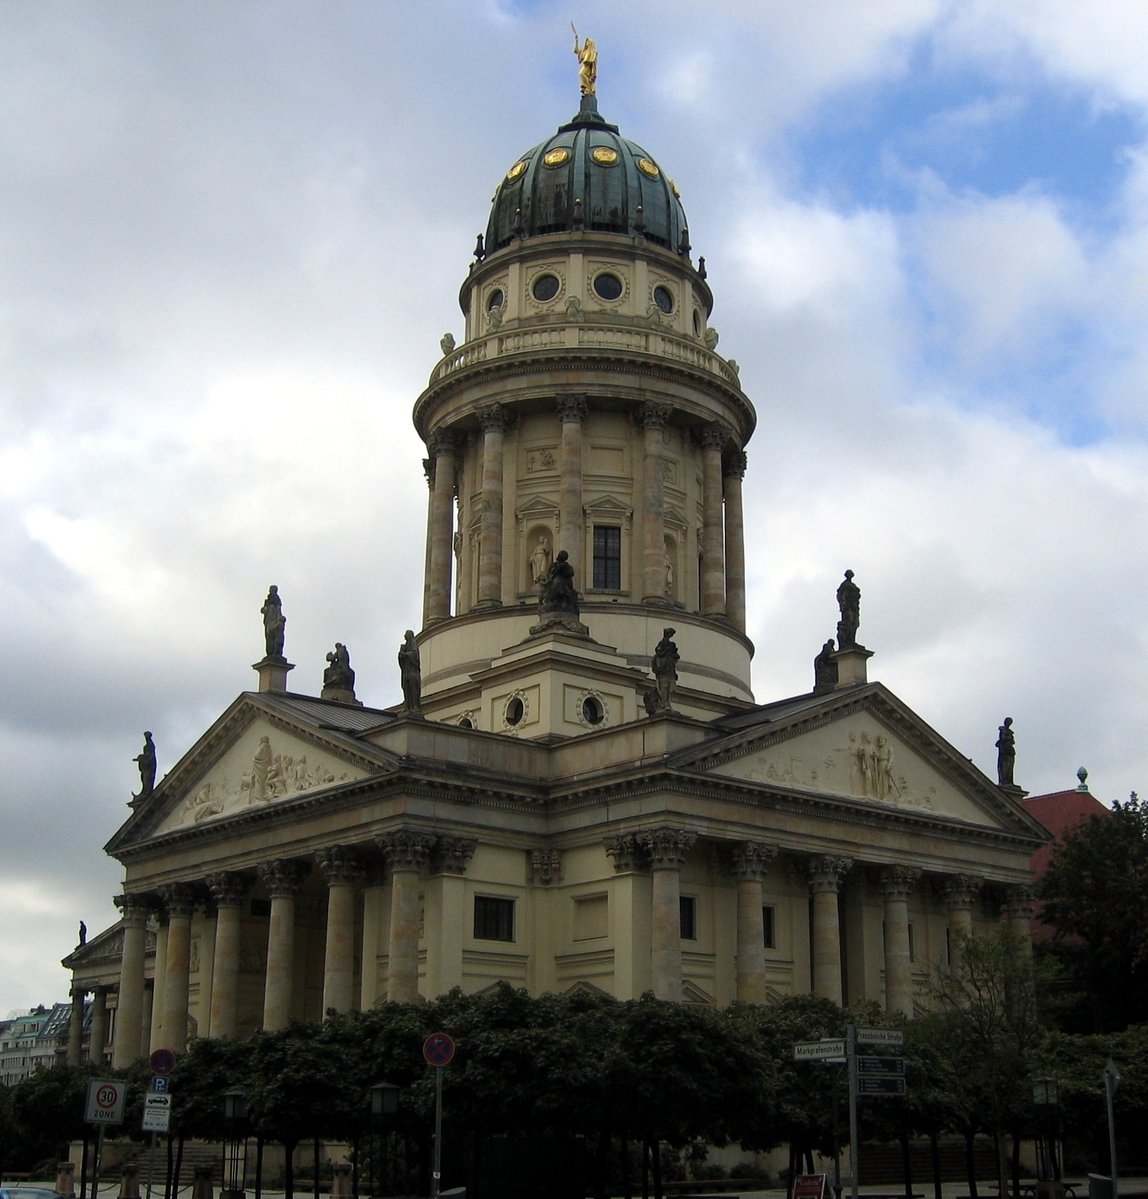 an old building with a domed tower under clouds